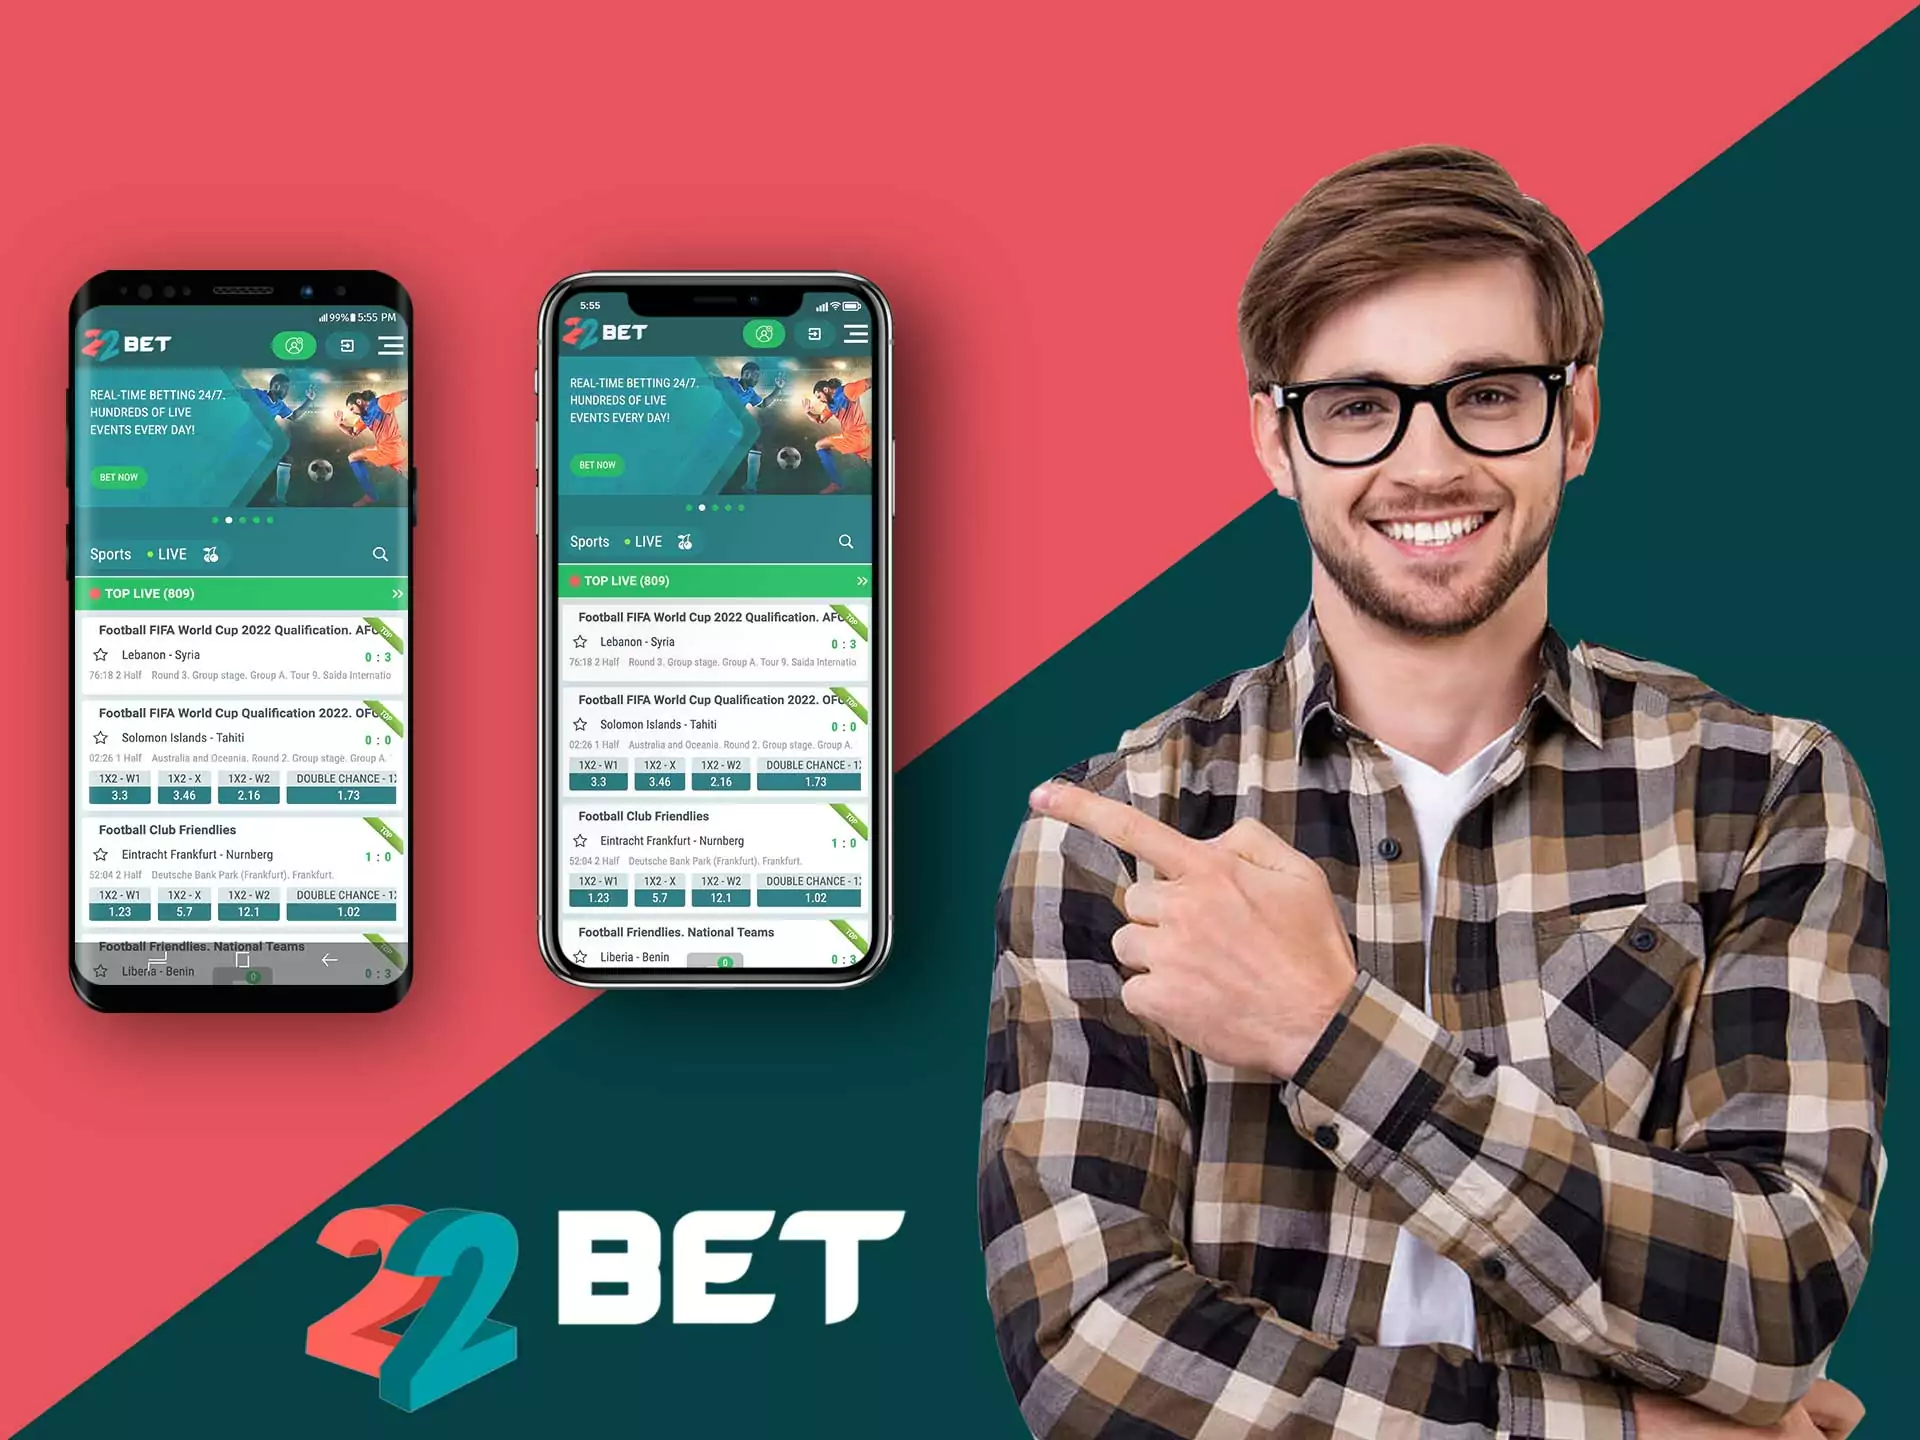 22bet app gives incredible betting possibilities, this app is a must try.